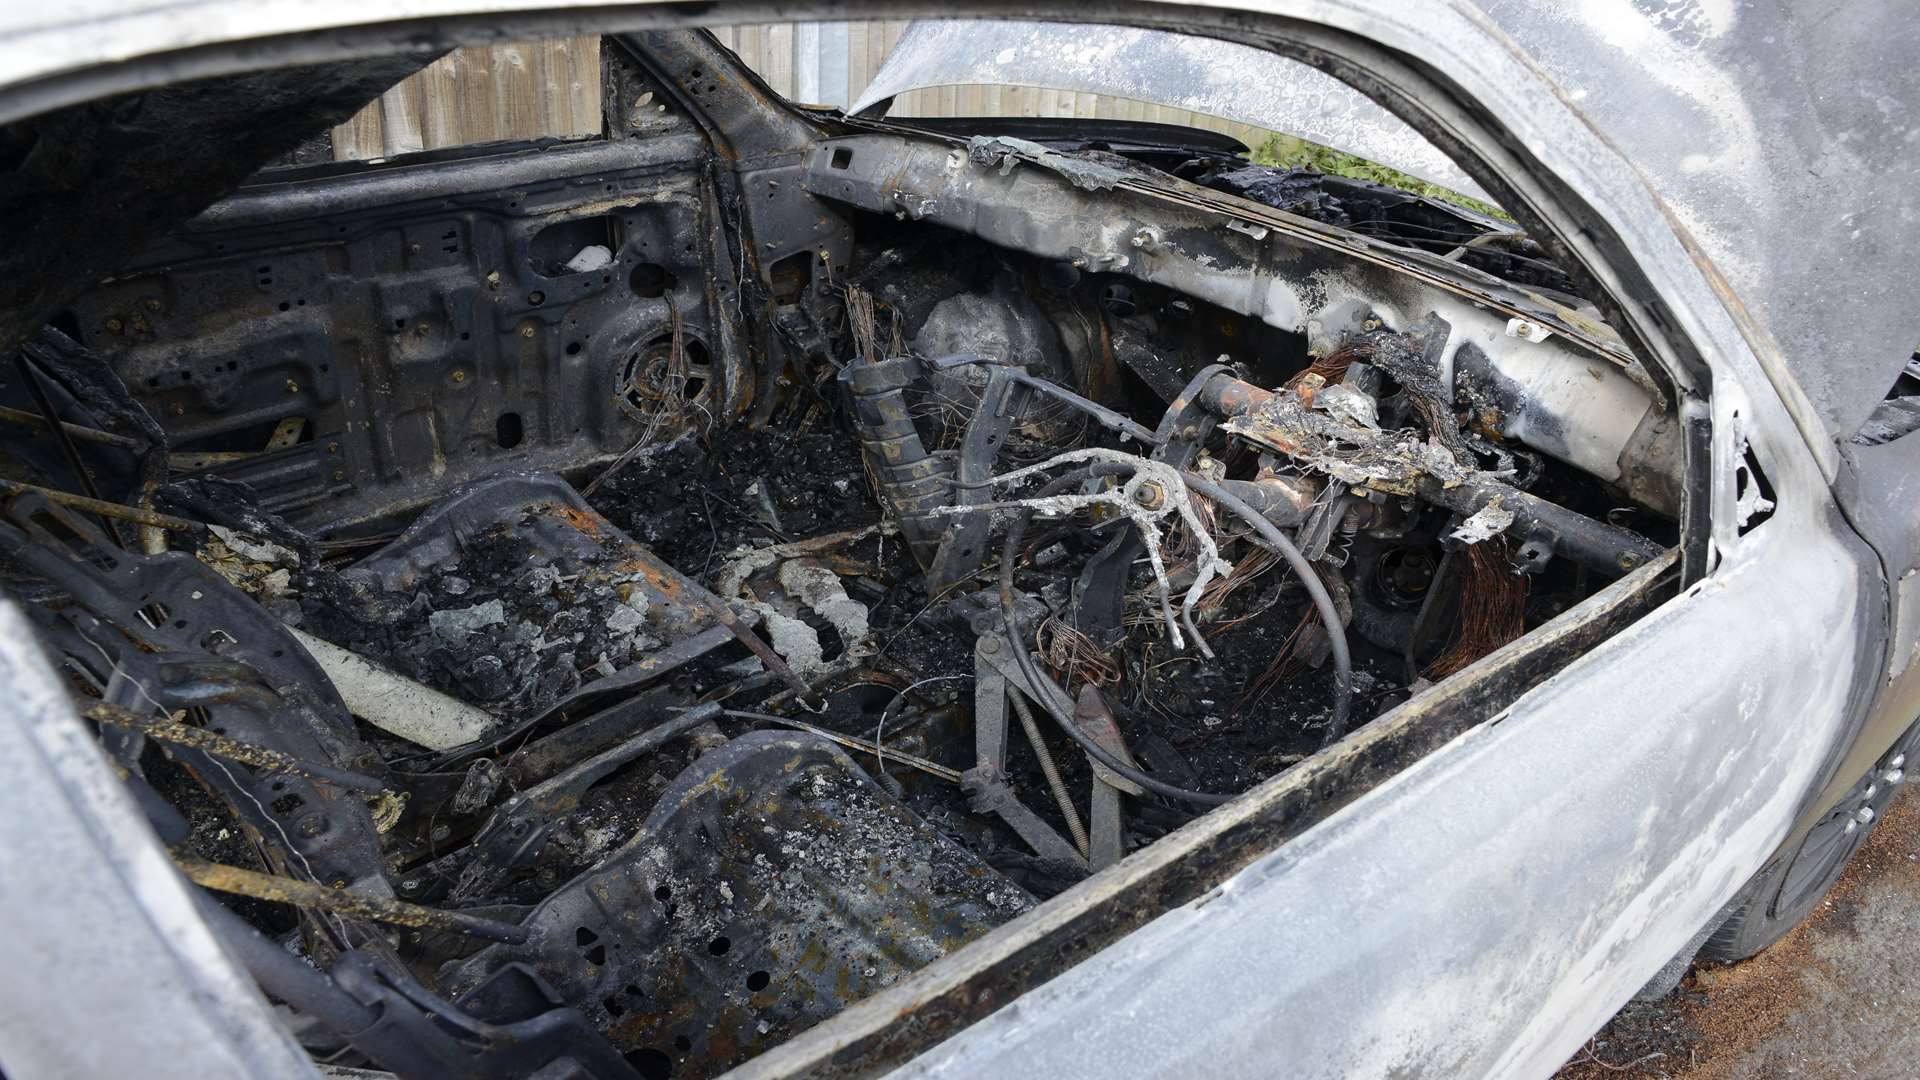 The car was completely gutted